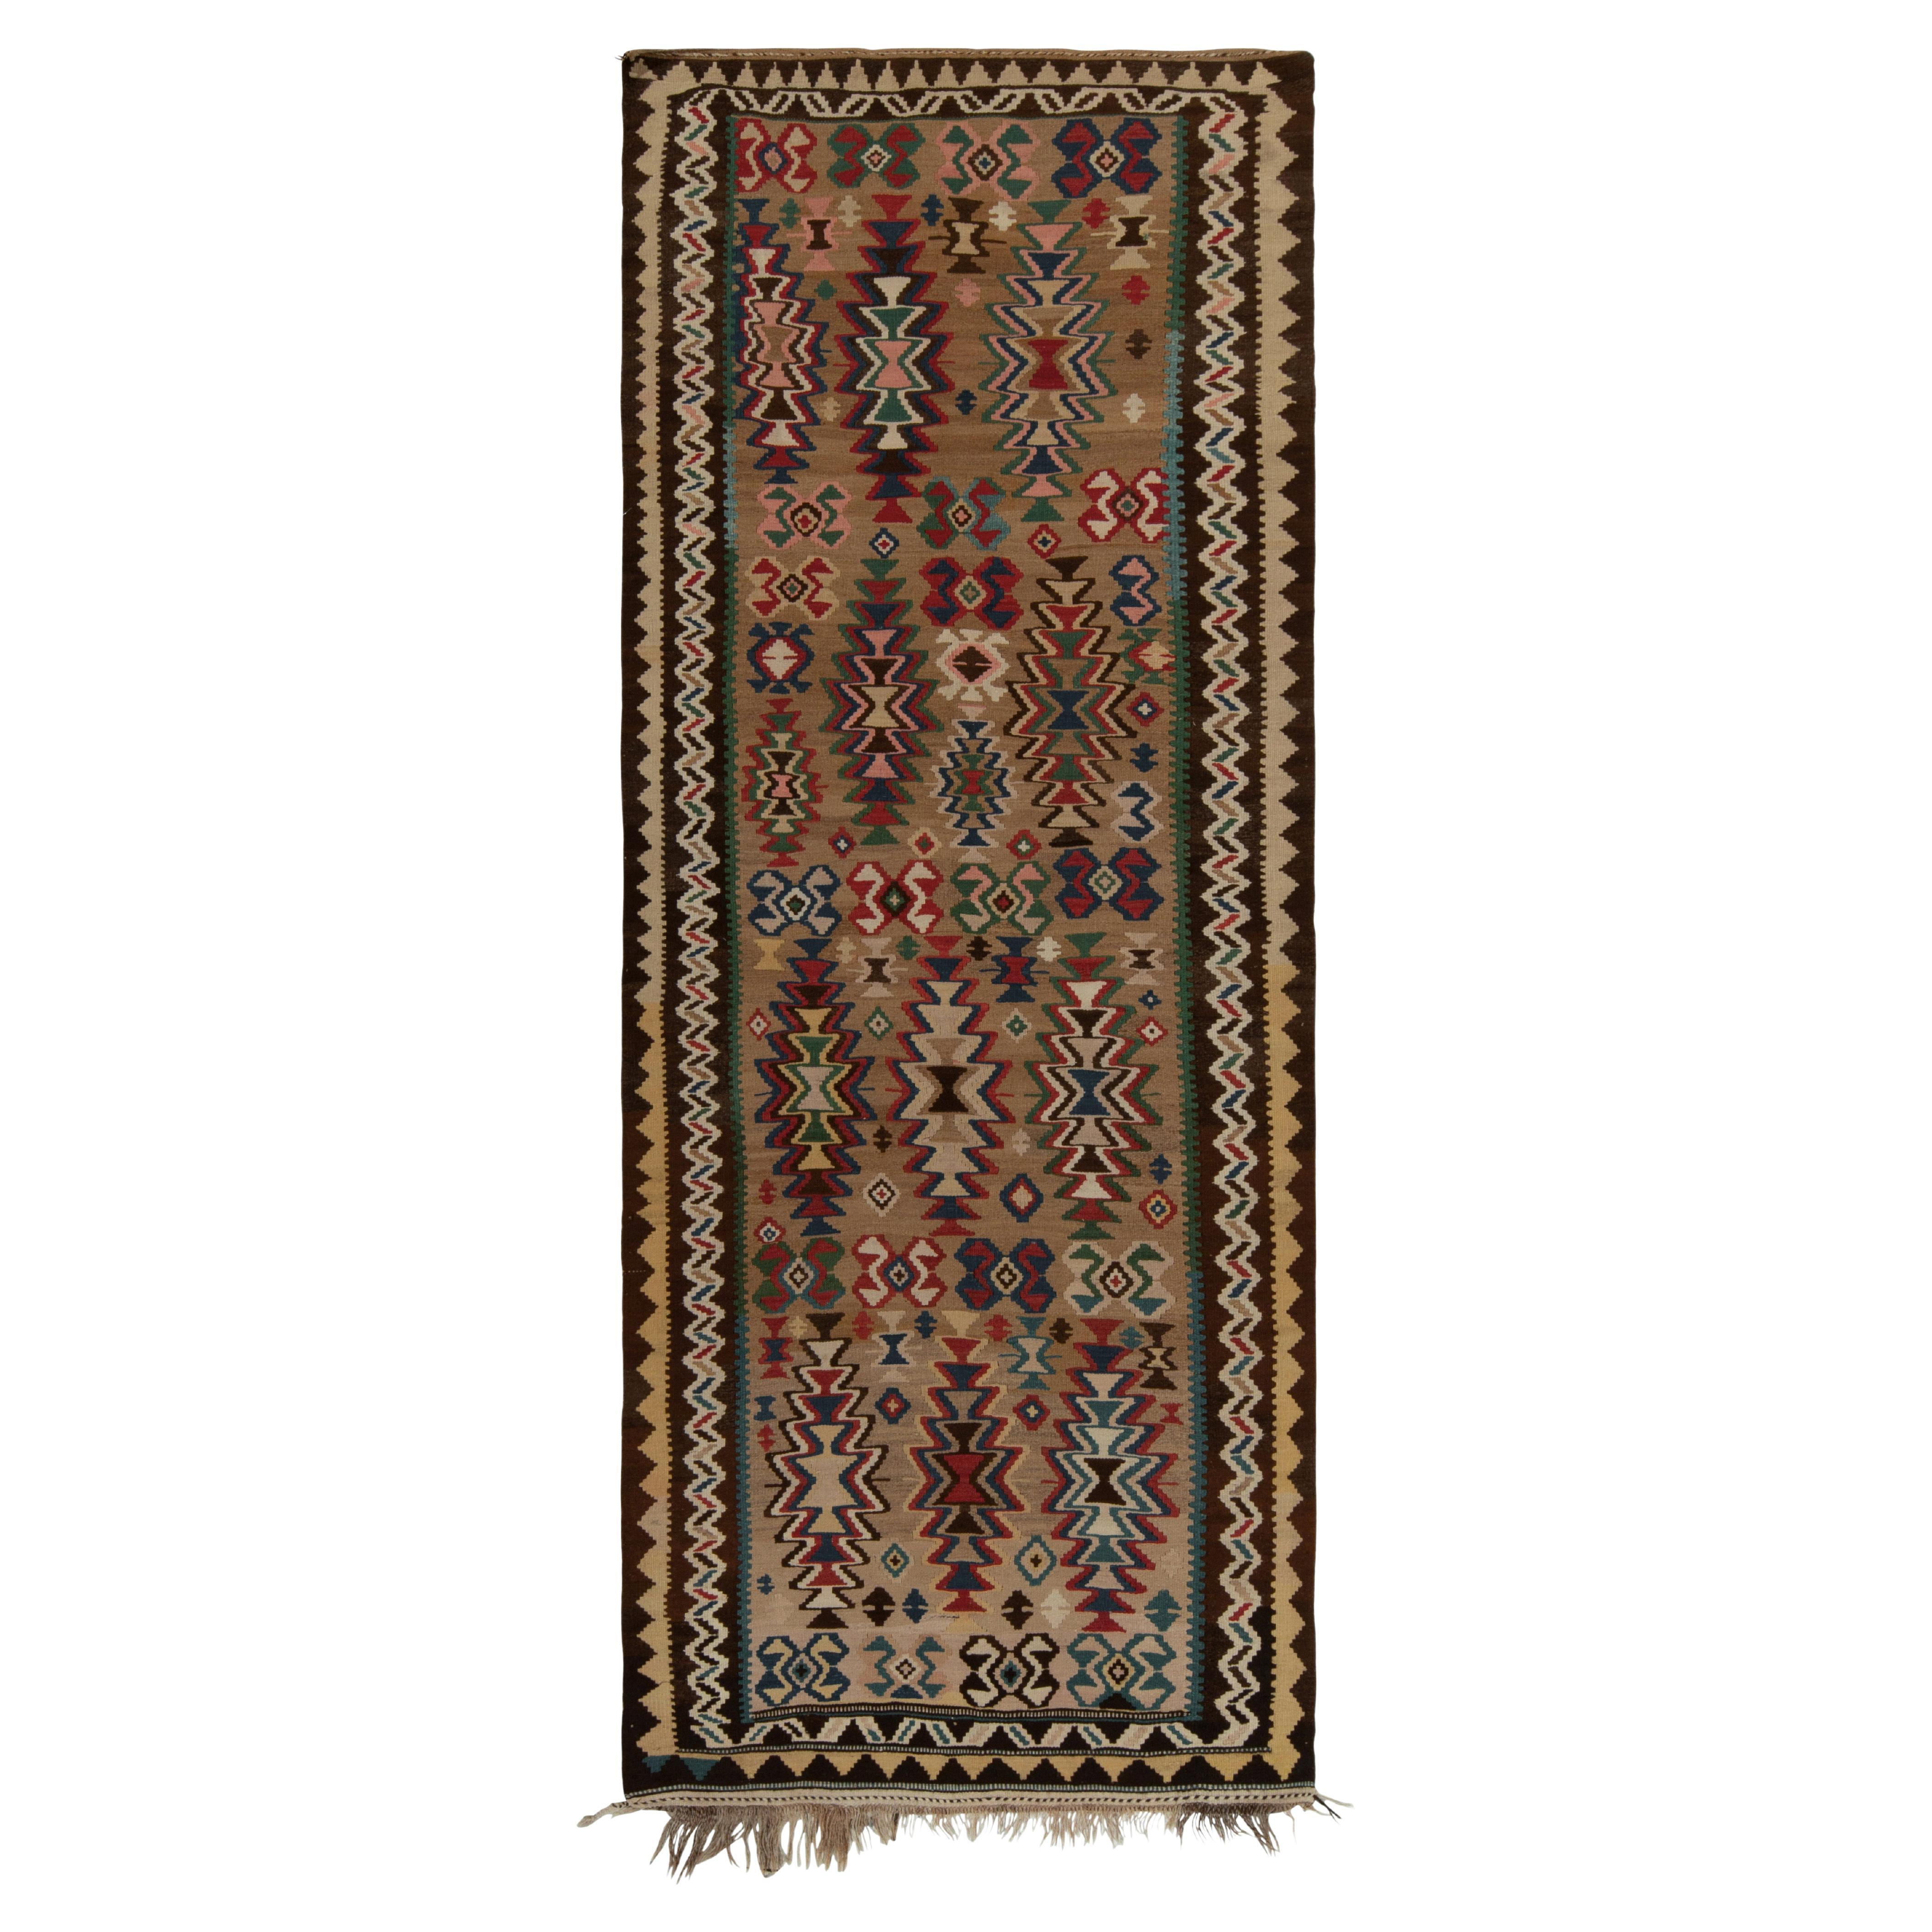 Antique Persian Kilim rug in Beige-Multicolor Tribal patterns by Rug & Kilim For Sale